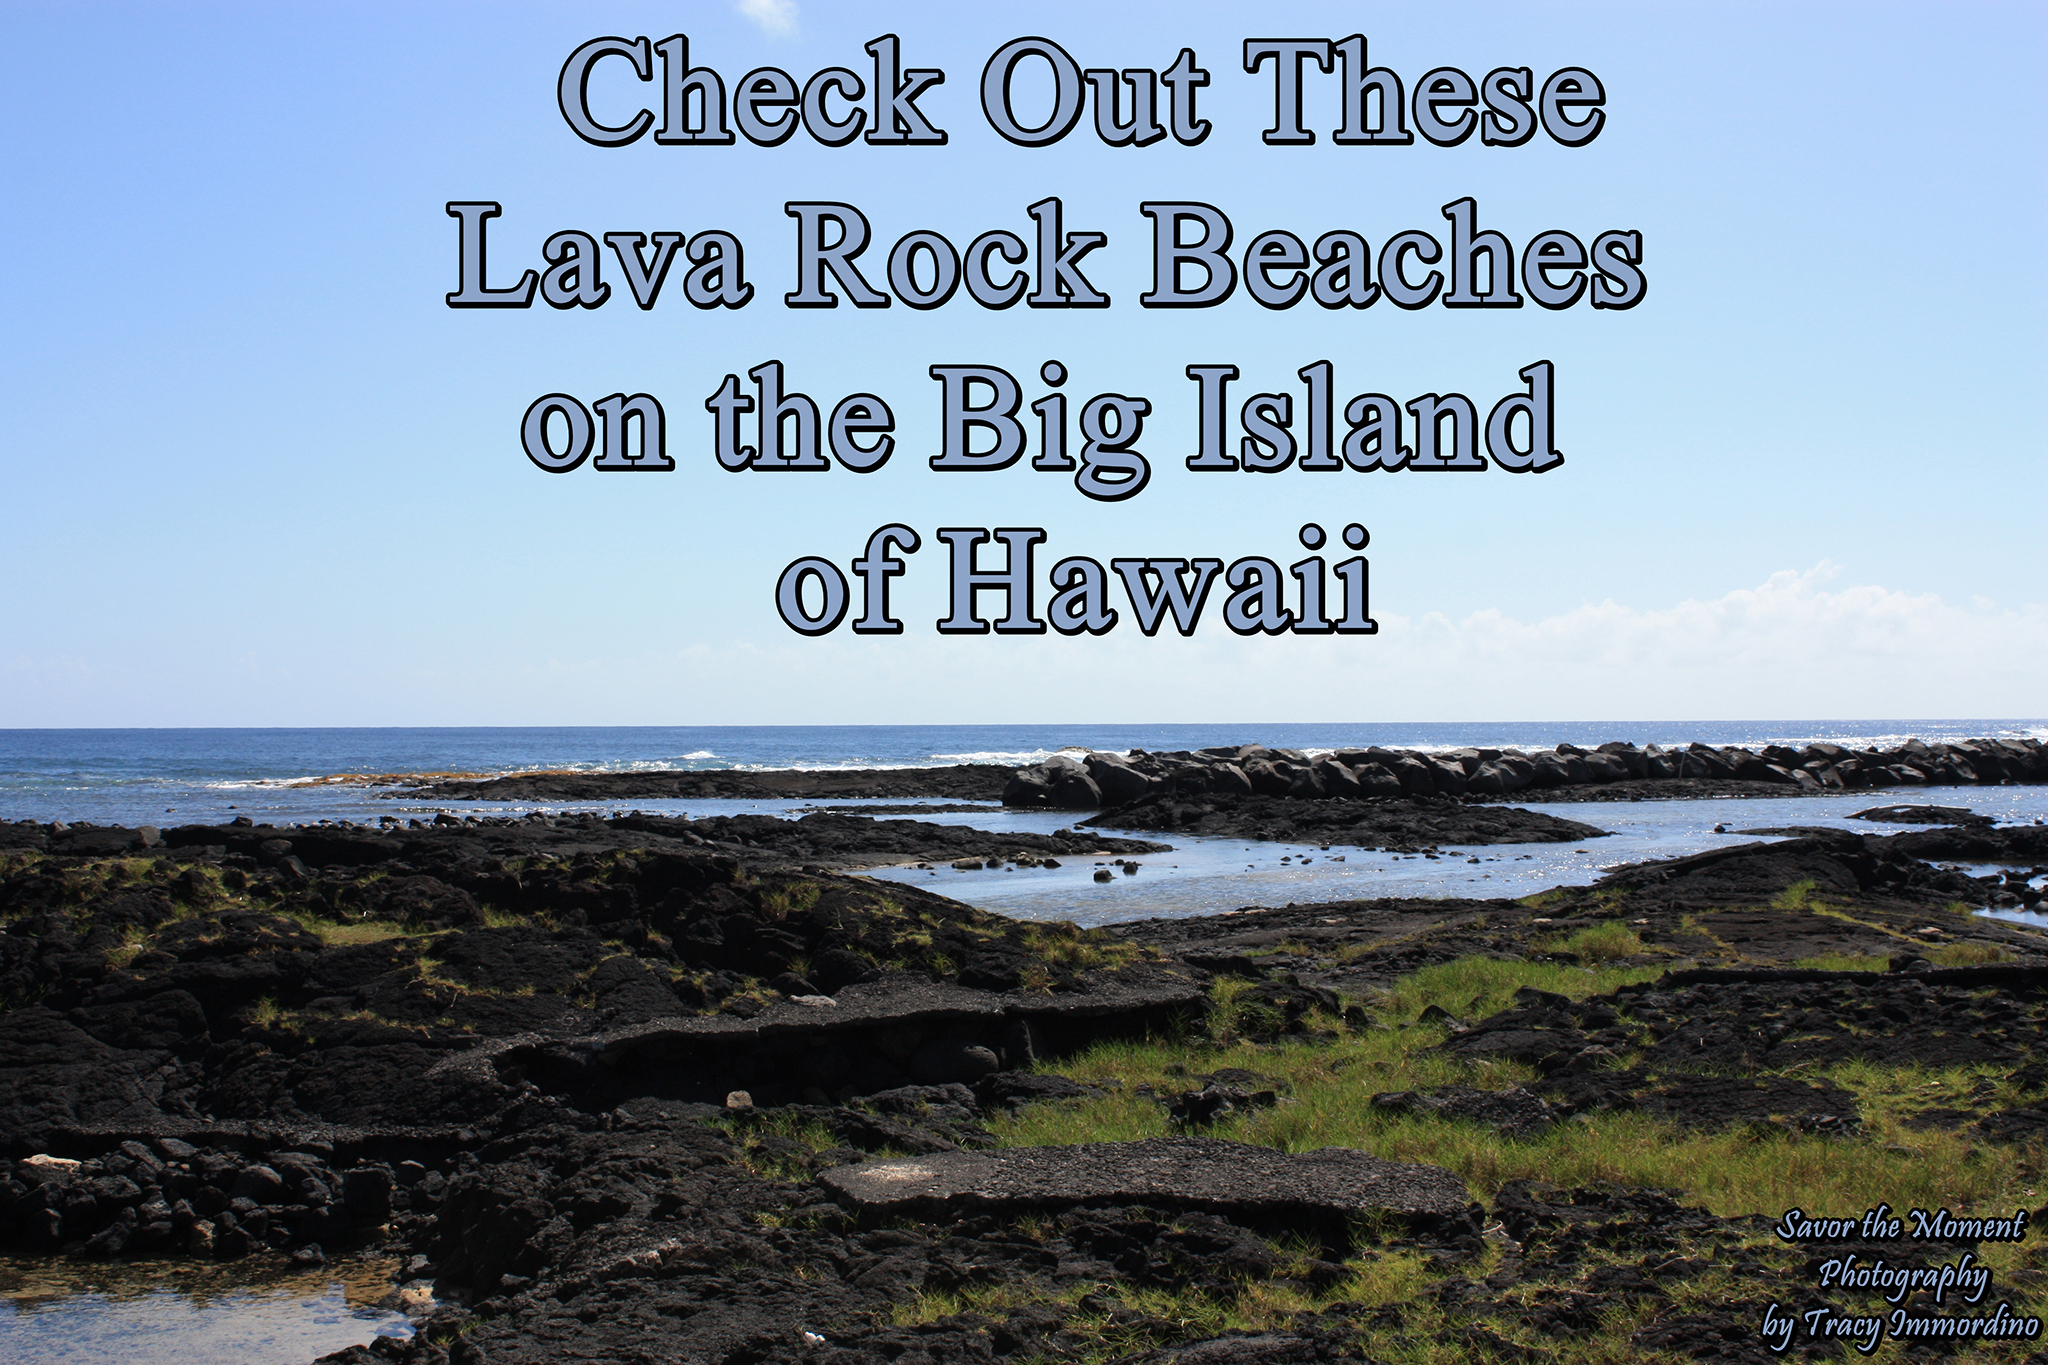 Check Out These Lava Rock Beaches on the Big Island of Hawaii